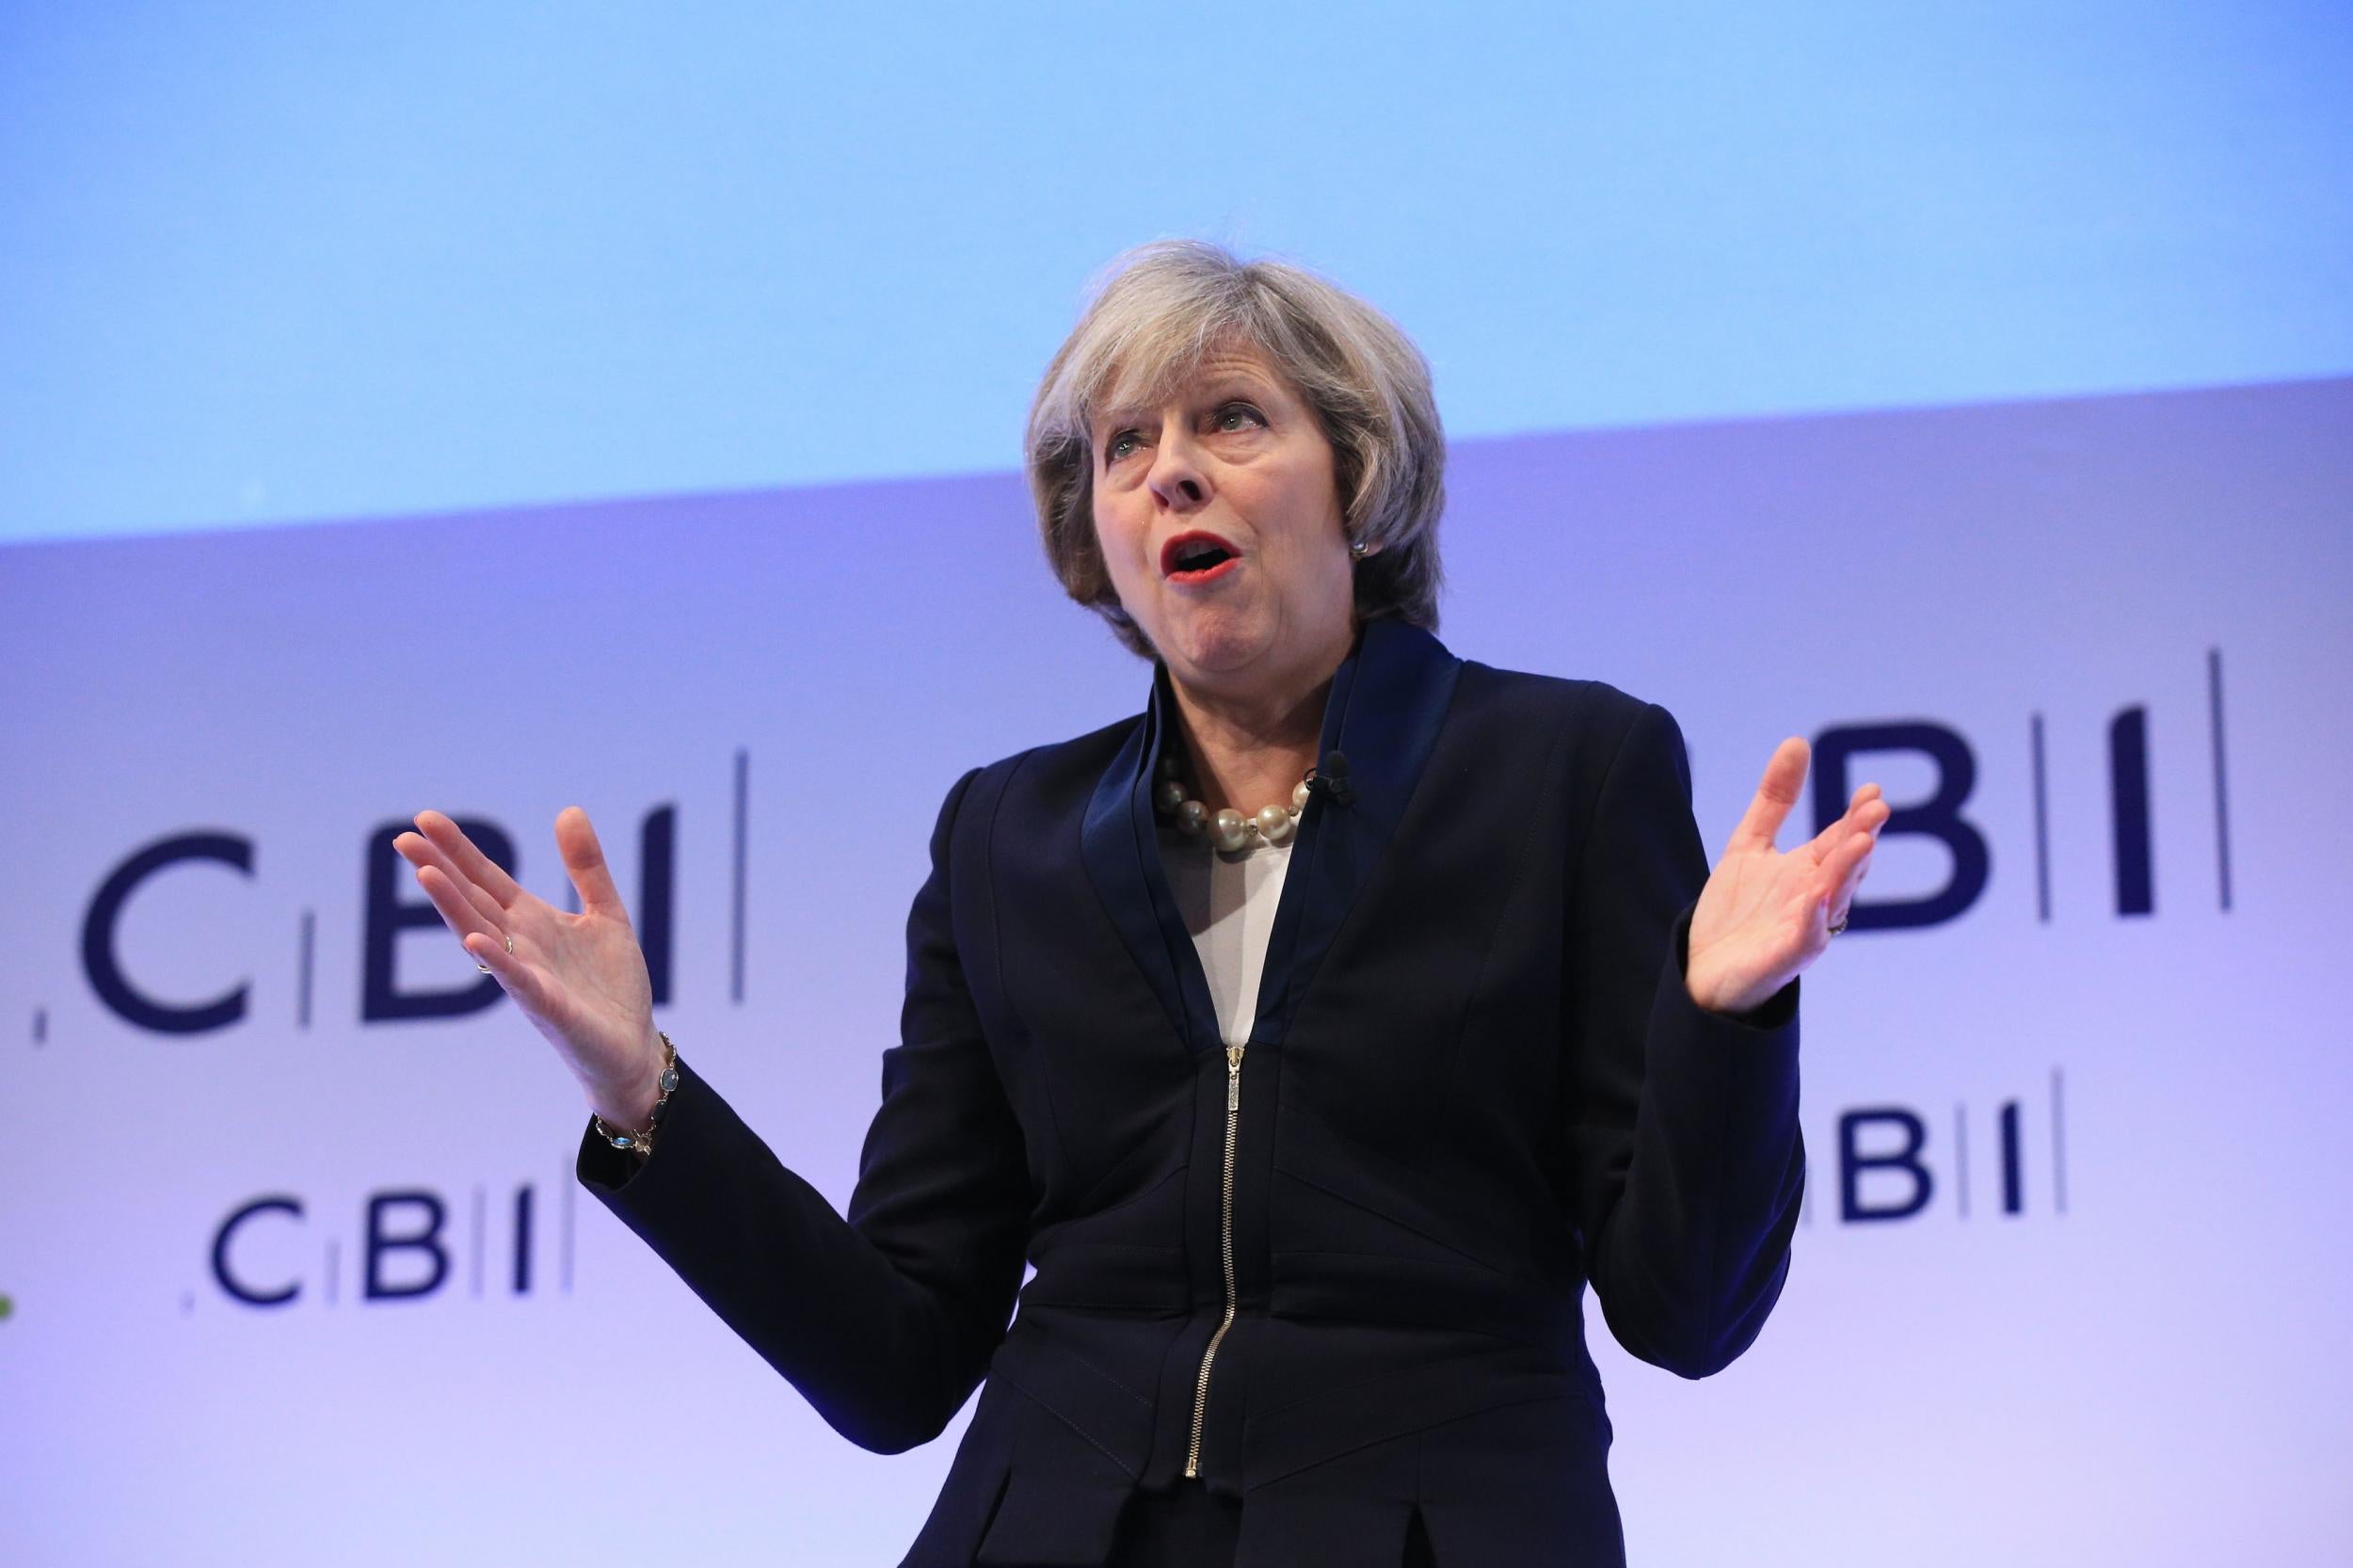 The Prime Minister said in July she wanted to make major changes in the way big business is governed